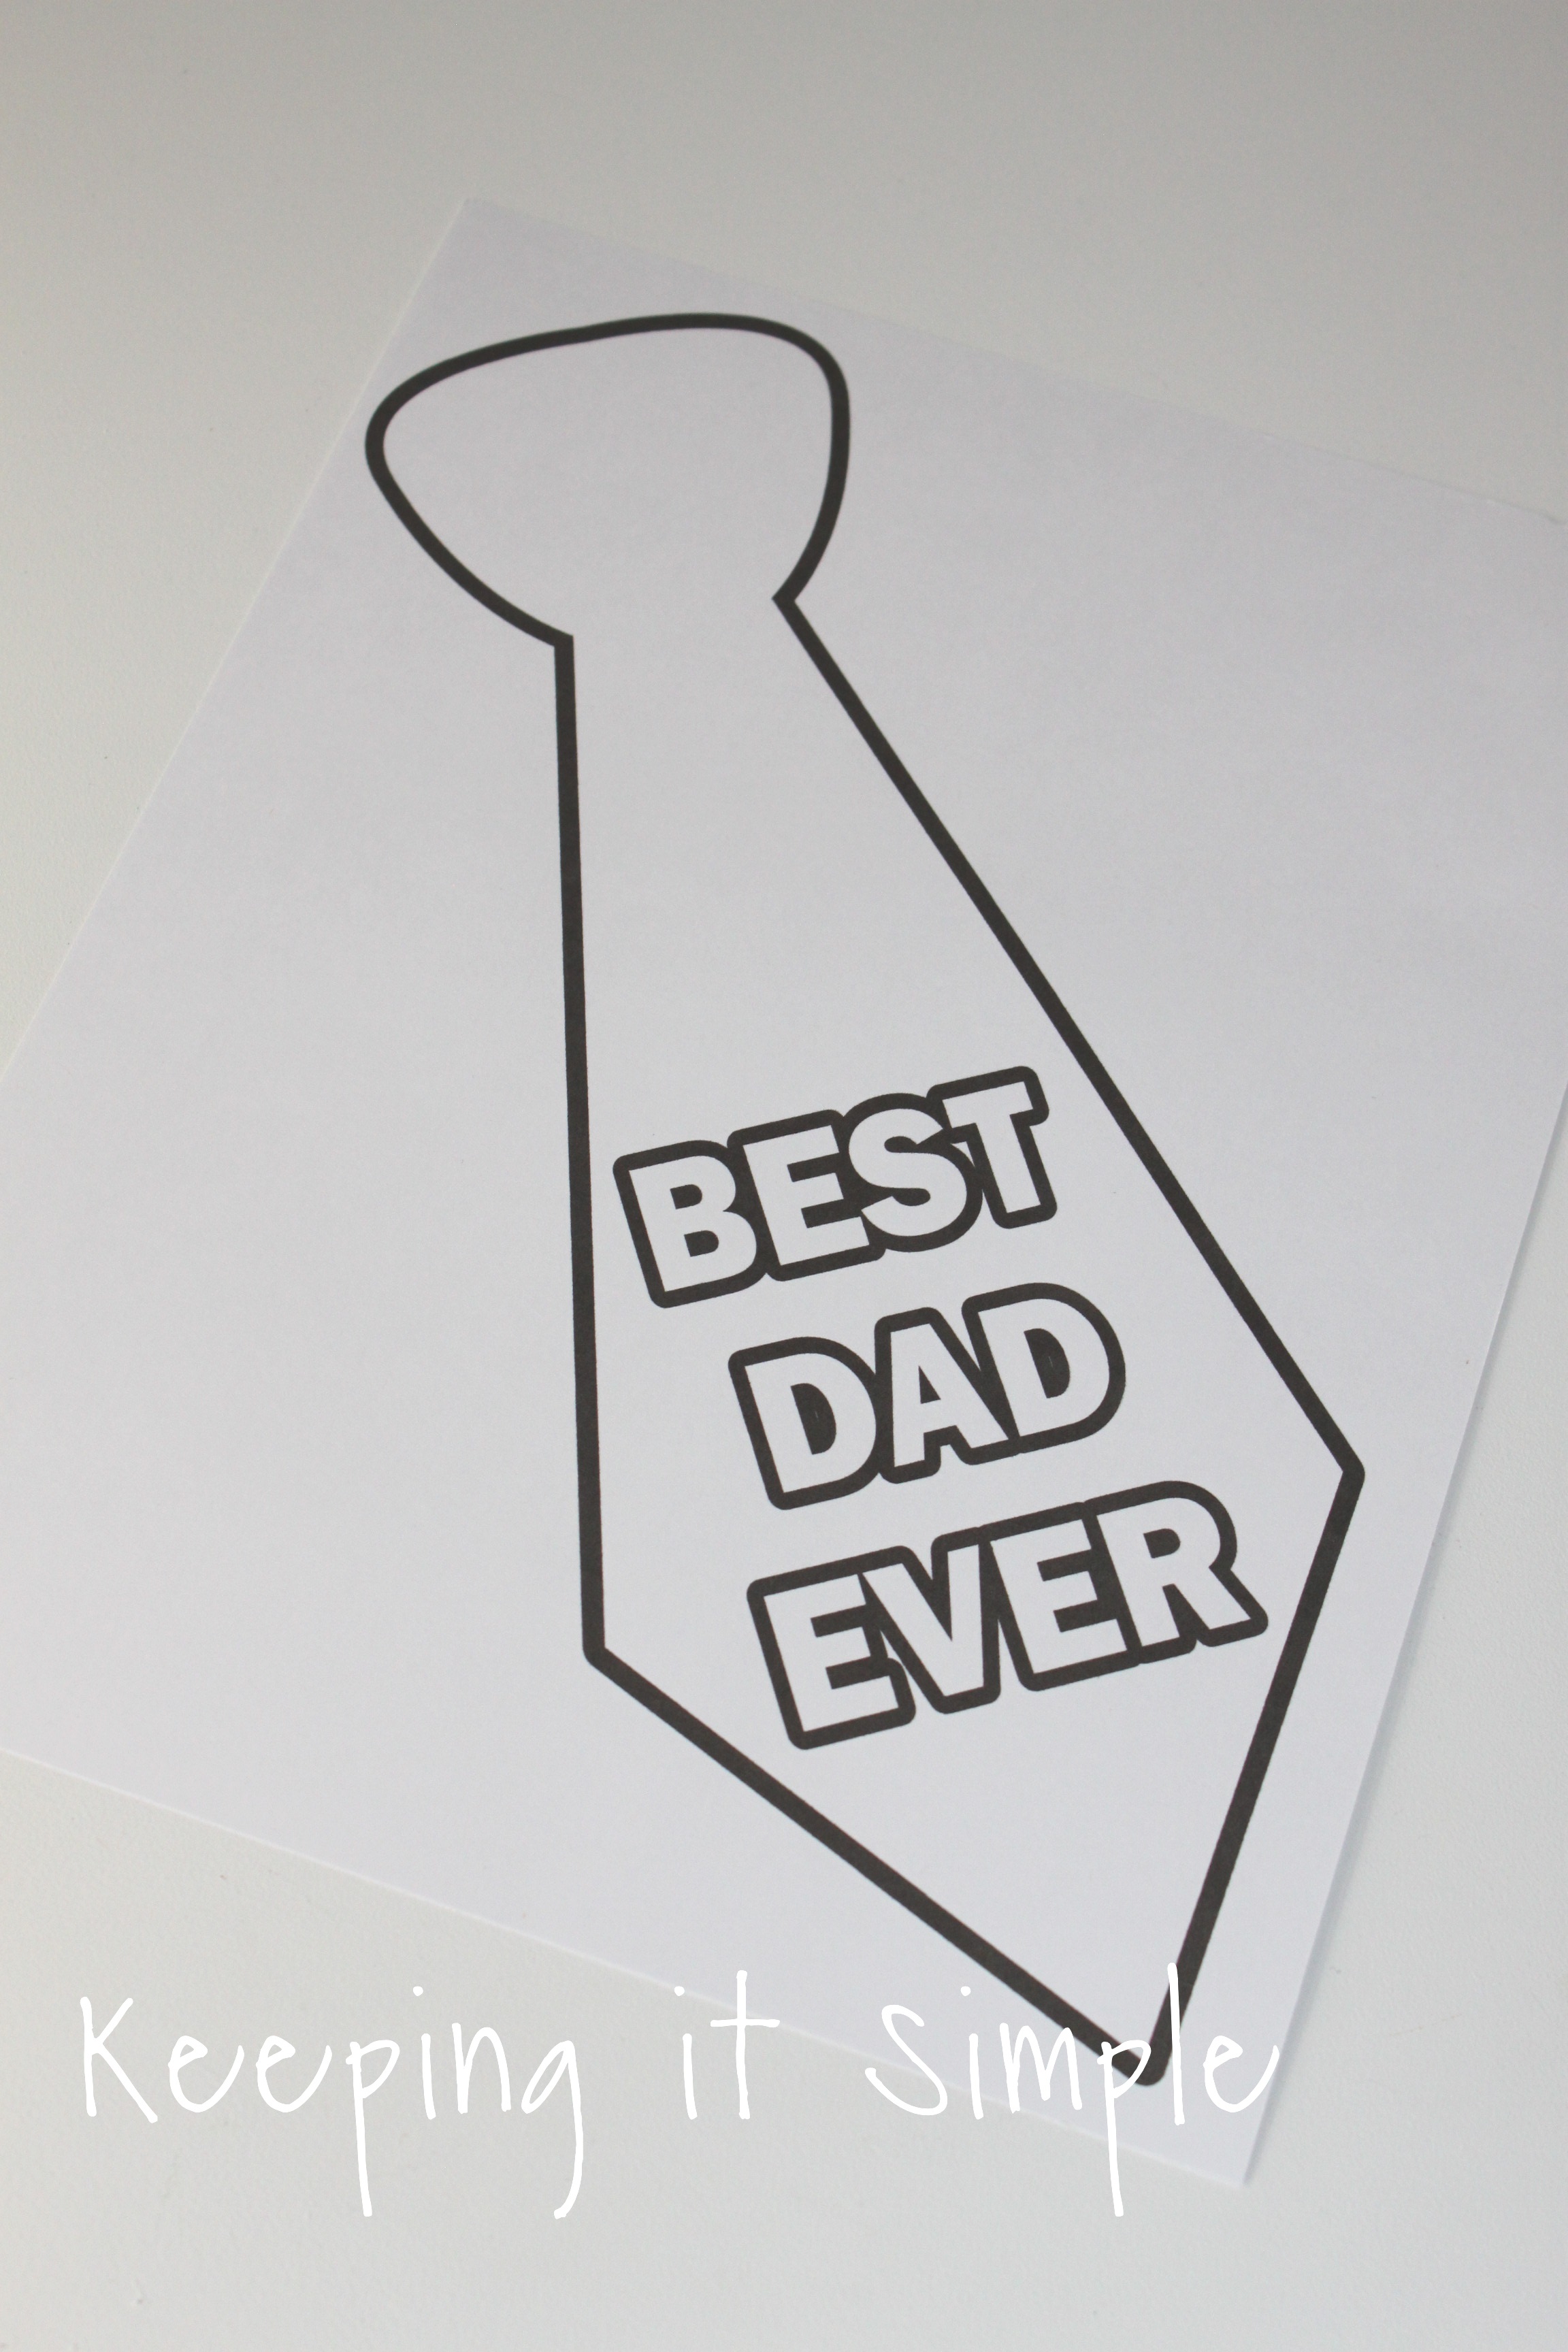 printable-fathers-day-tie